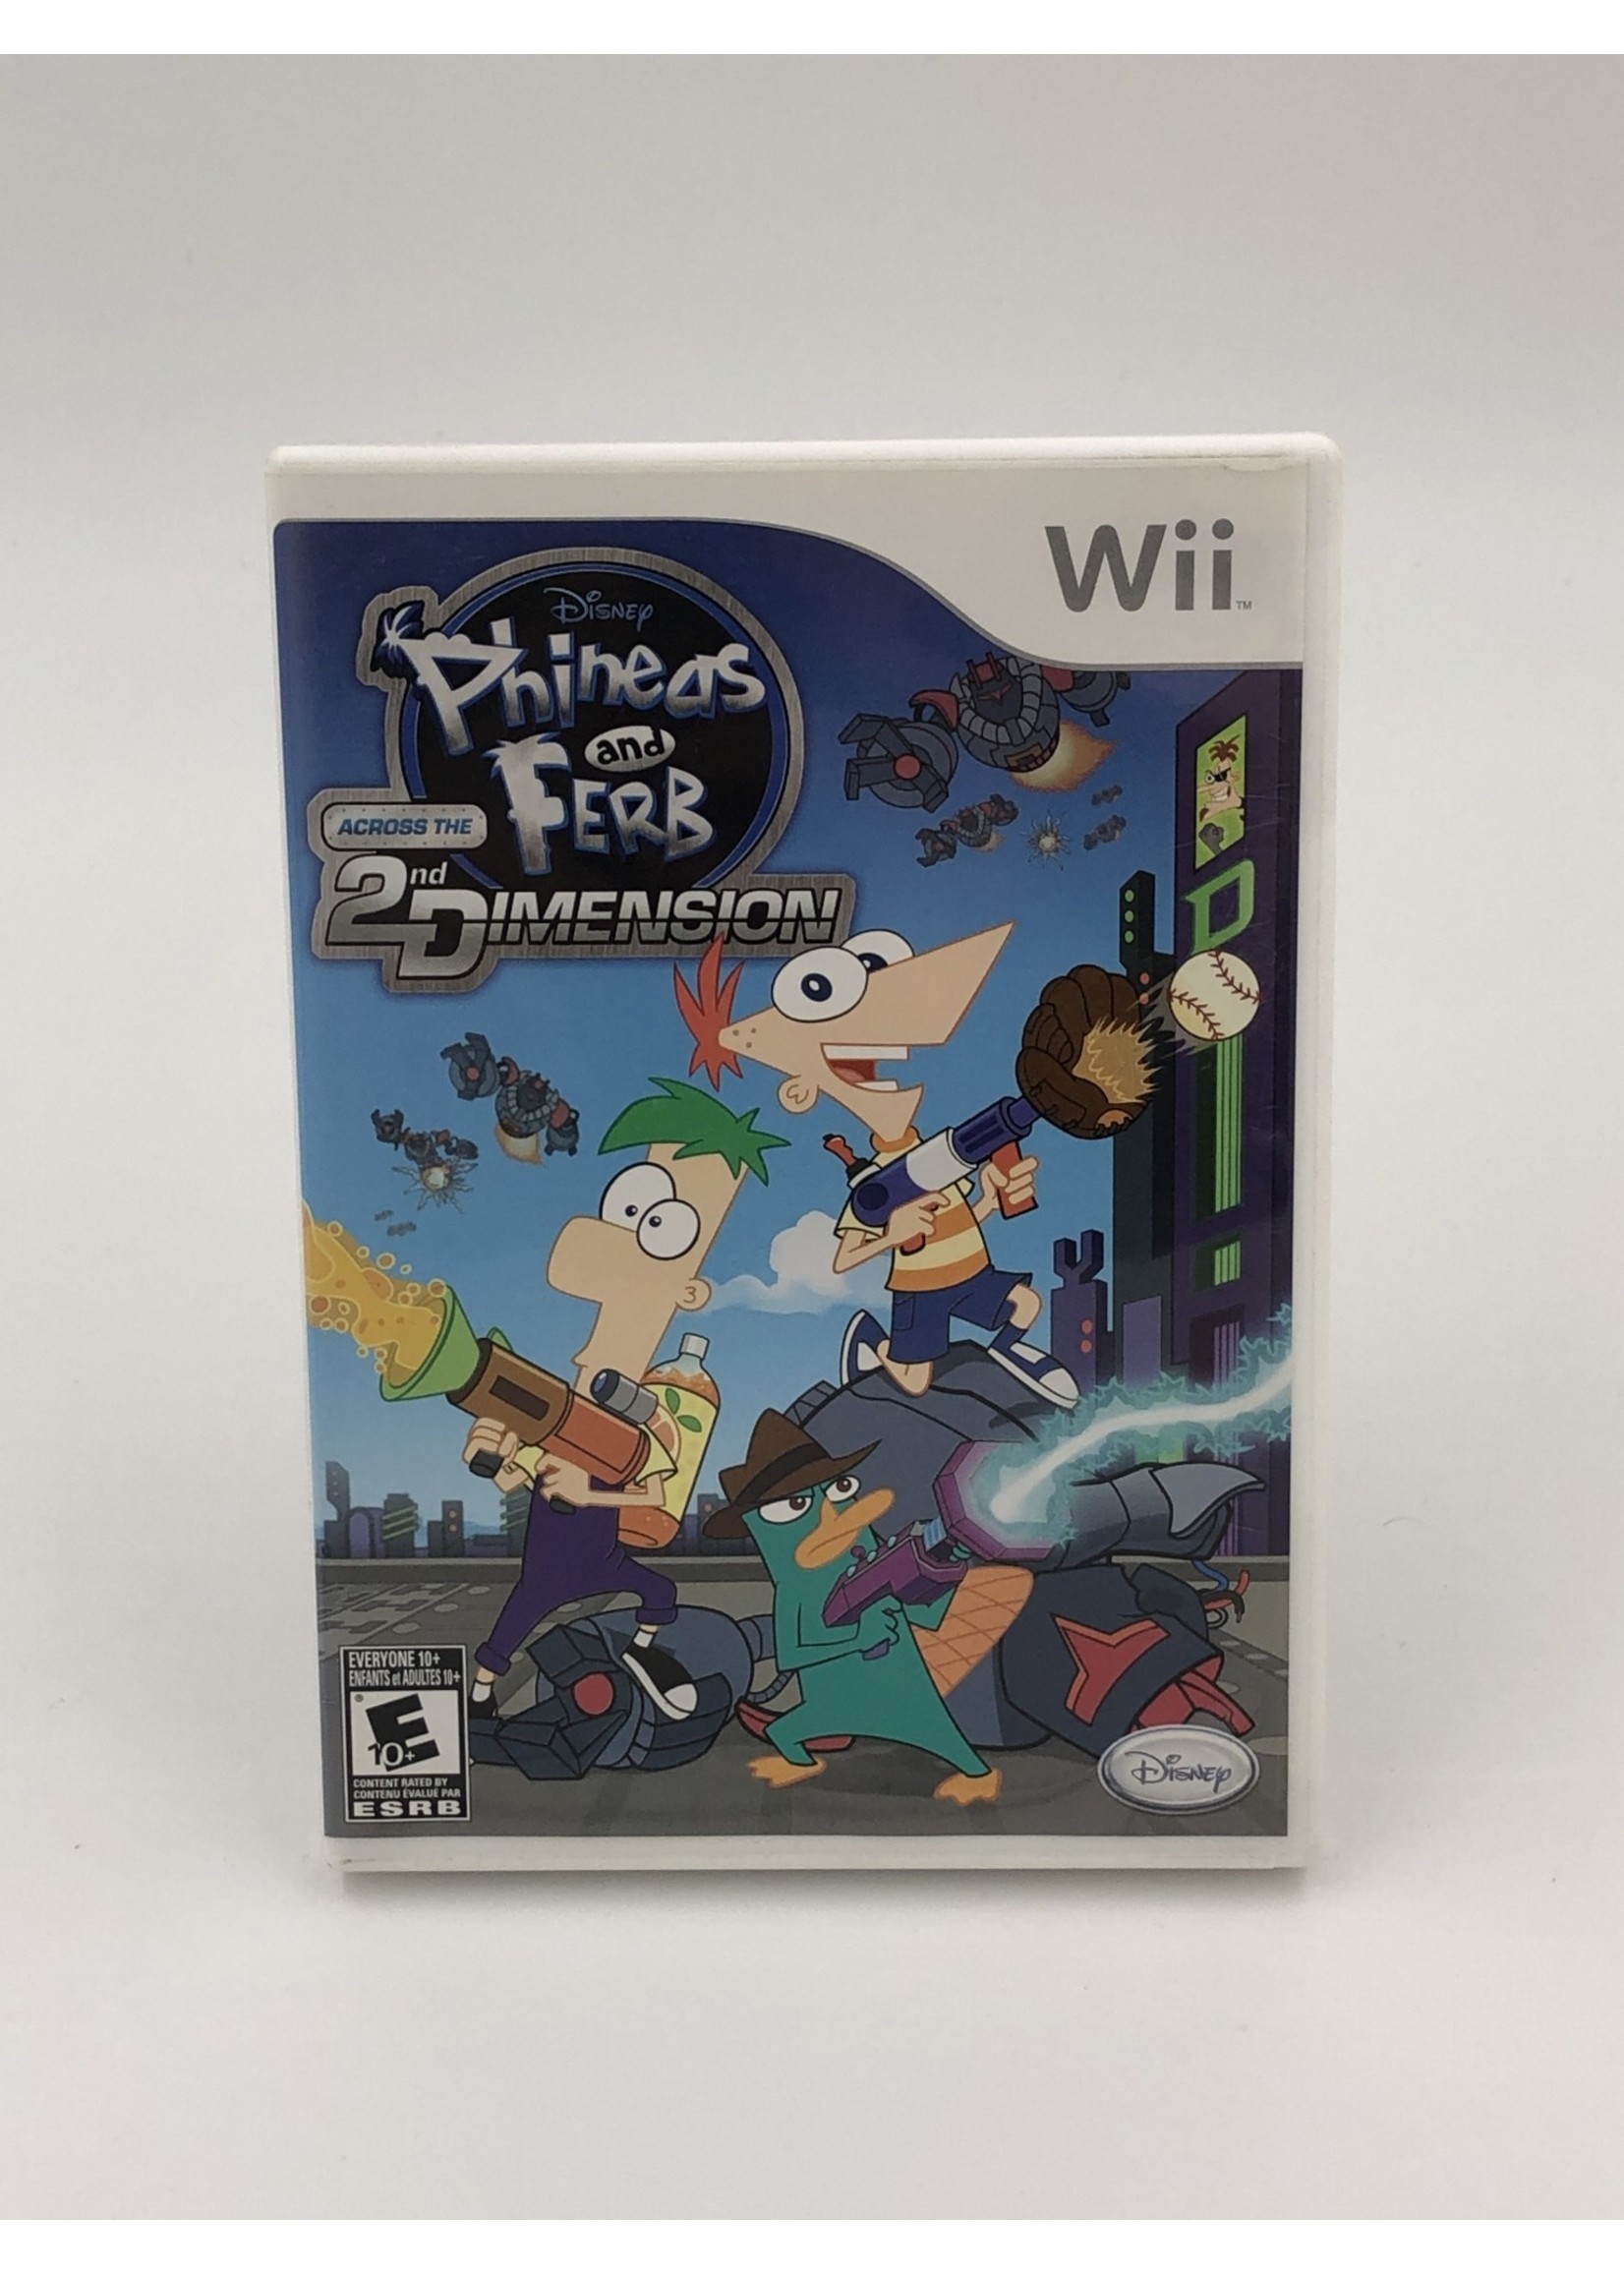 Nintendo   Disney Phineas and Ferb Across the 2nd Dimension - Wii